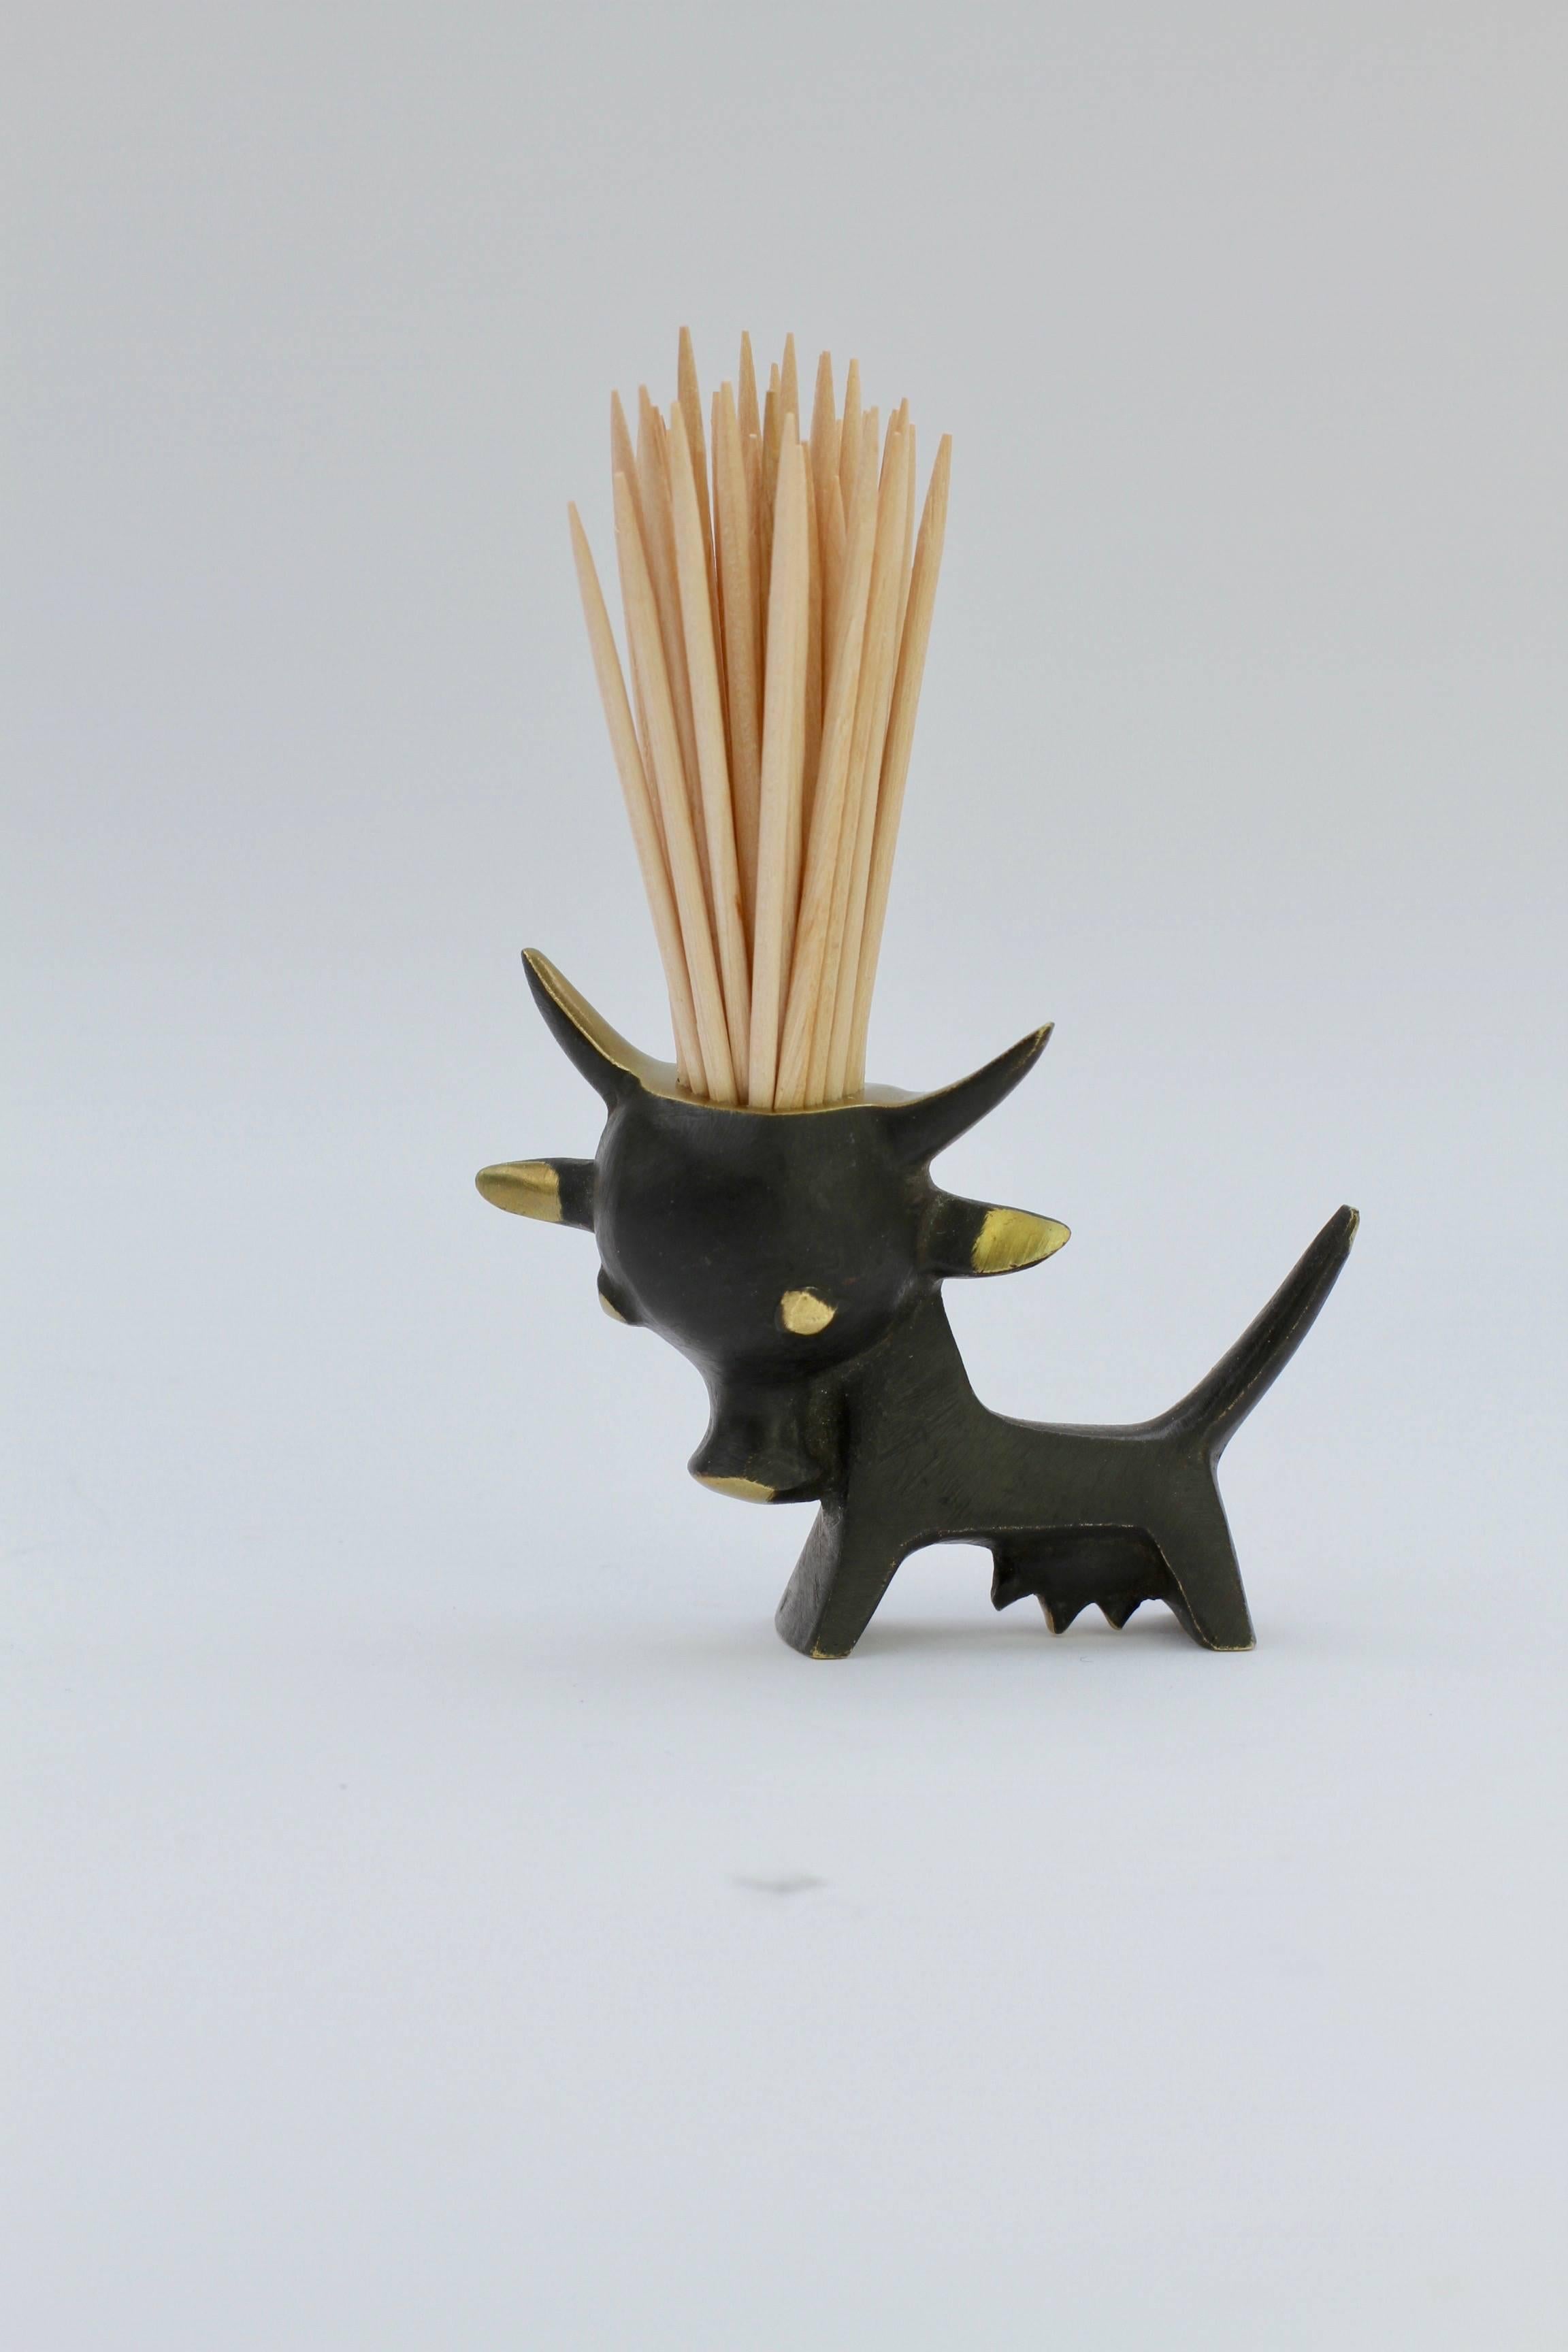 Mid-Century Modern Whimsical Brass Cow Toothpick Holder by Walter Bosse for Baller, circa 1950s